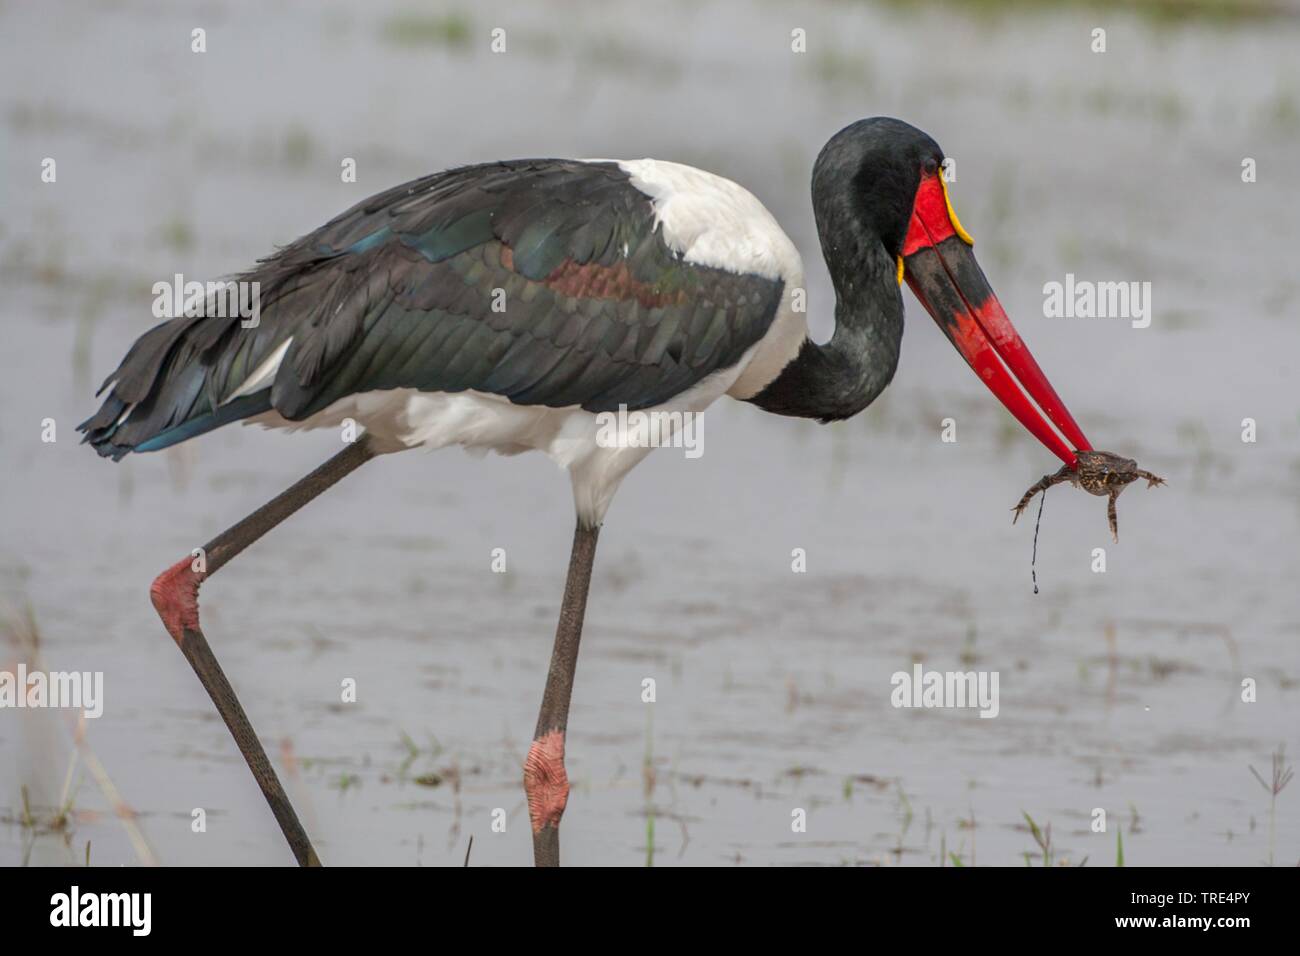 saddle-bill stork (Ephippiorhynchus senegalensis), stalking with a frog in the bill through shallow water, side view, Kenya, Masai Mara National Park Stock Photo